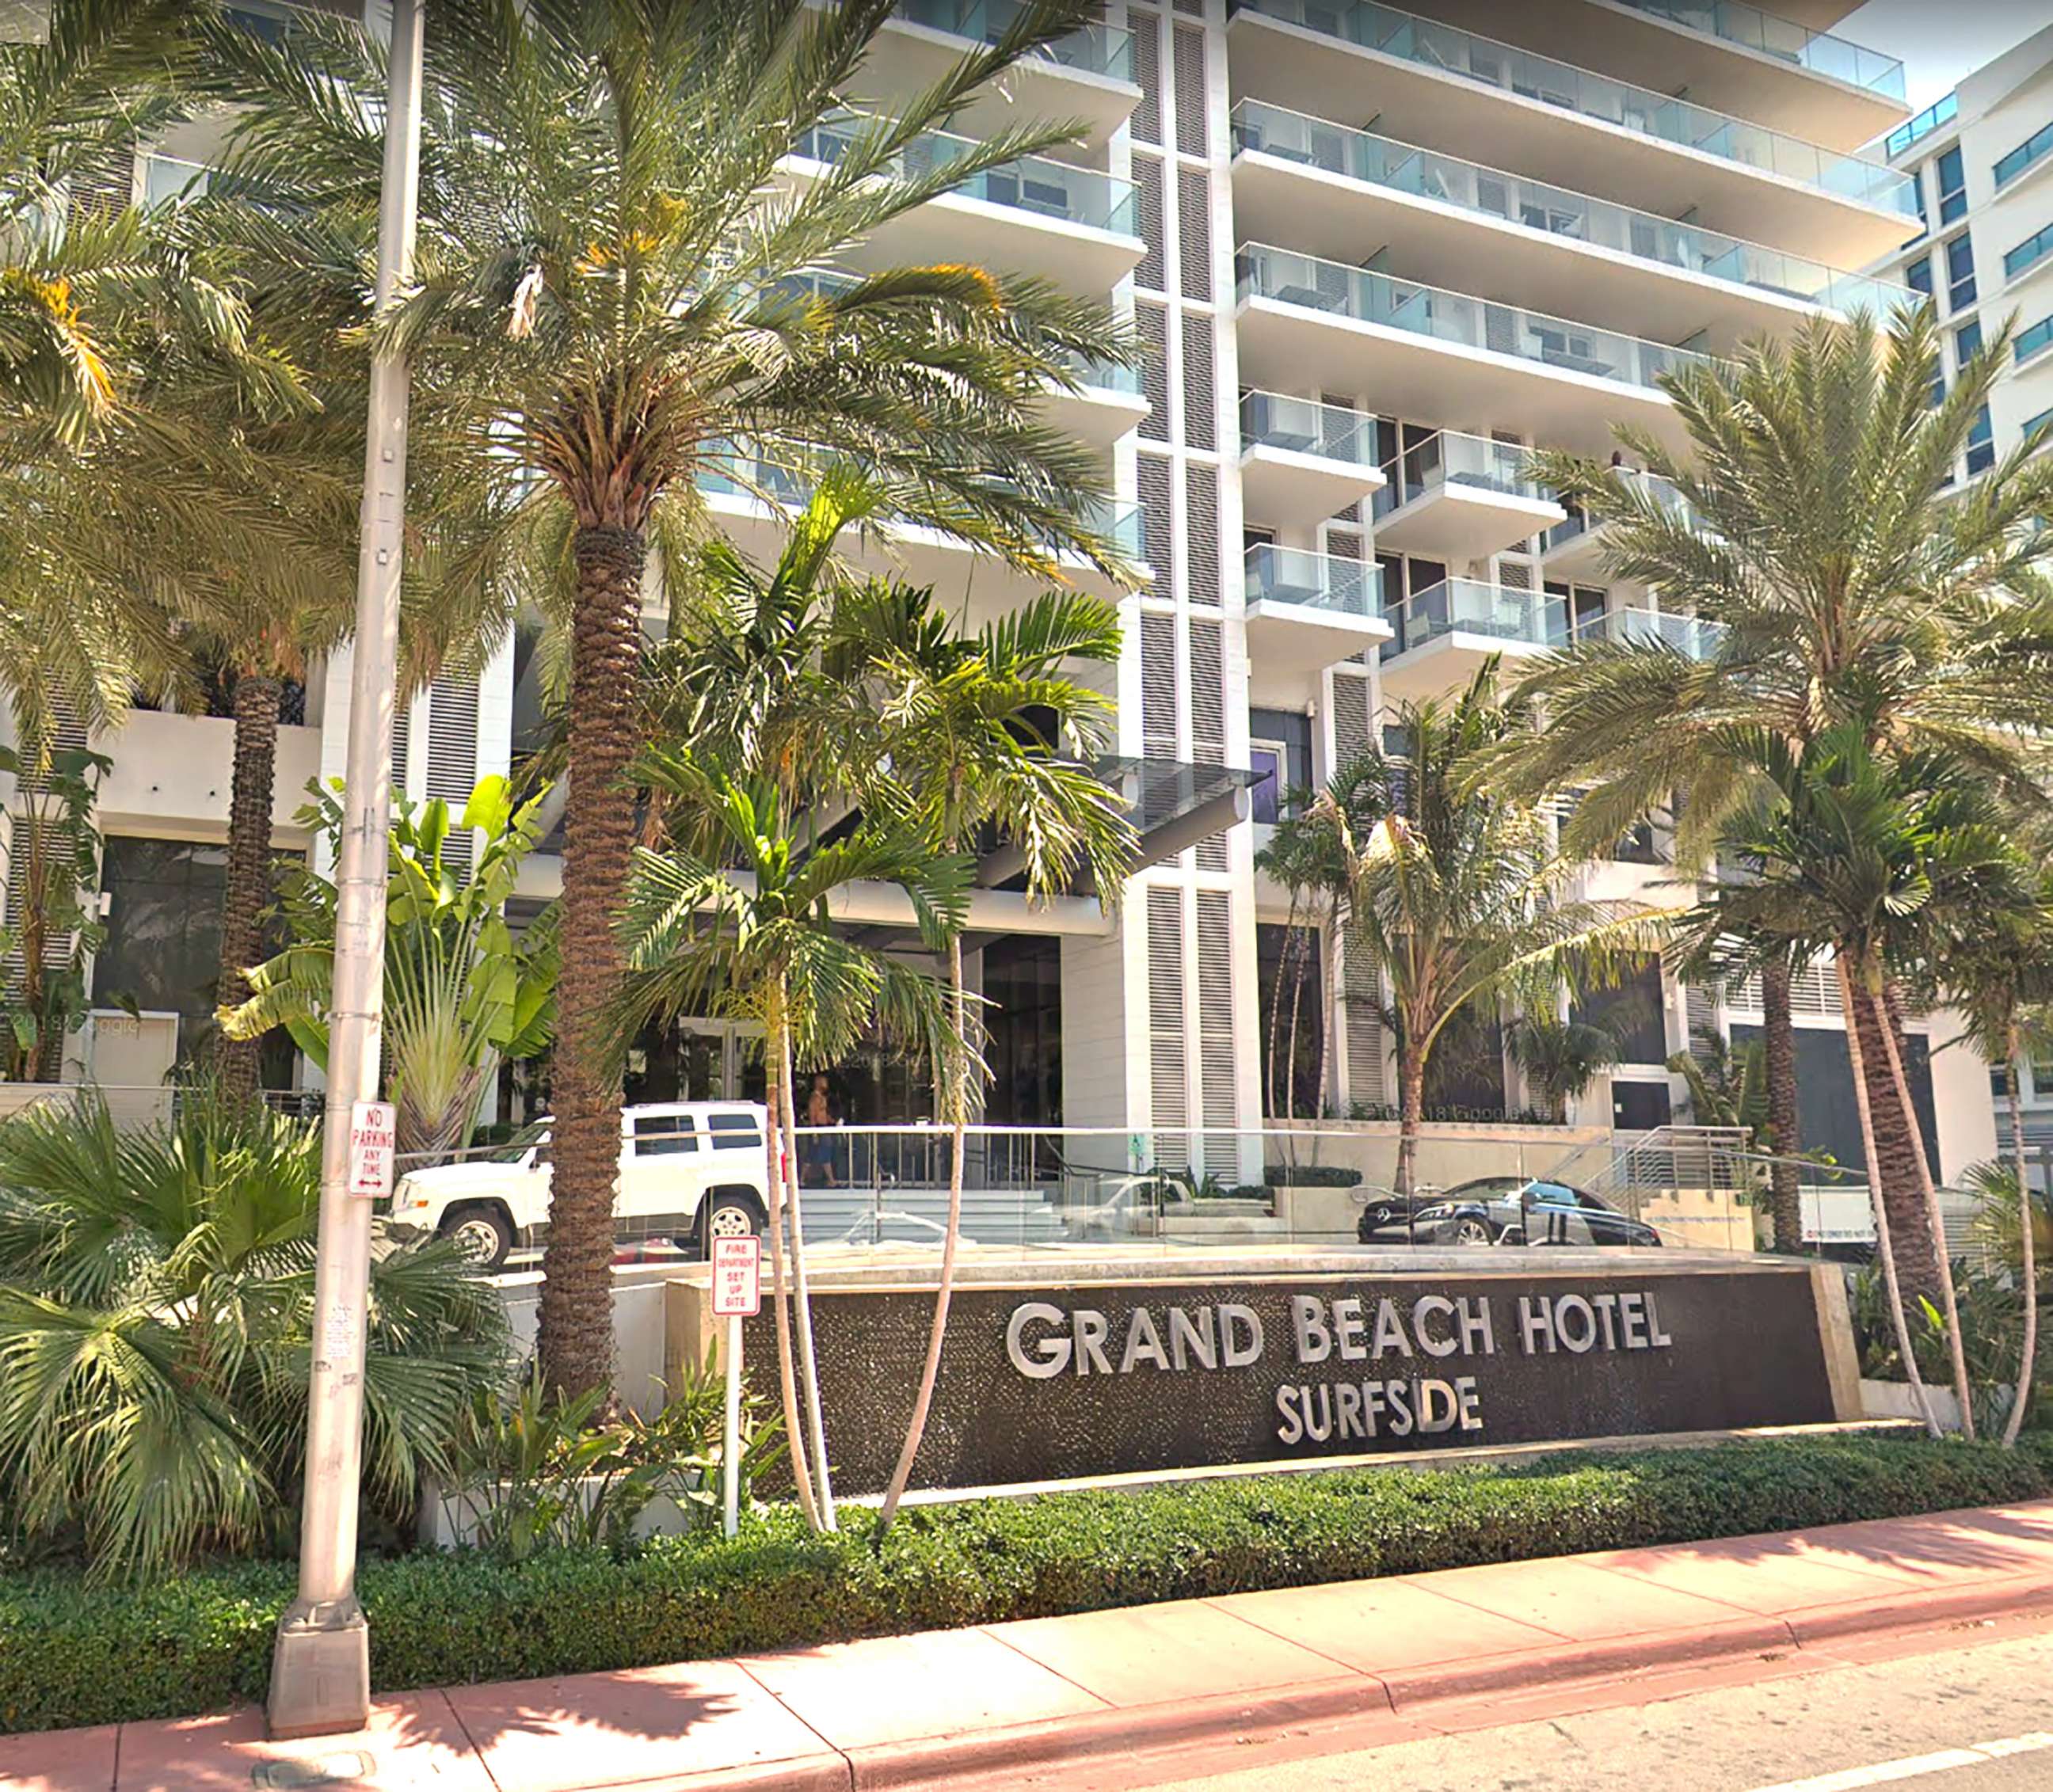 PHOTO: Grand Beach Hotel is pictured in this grab from Google Maps.